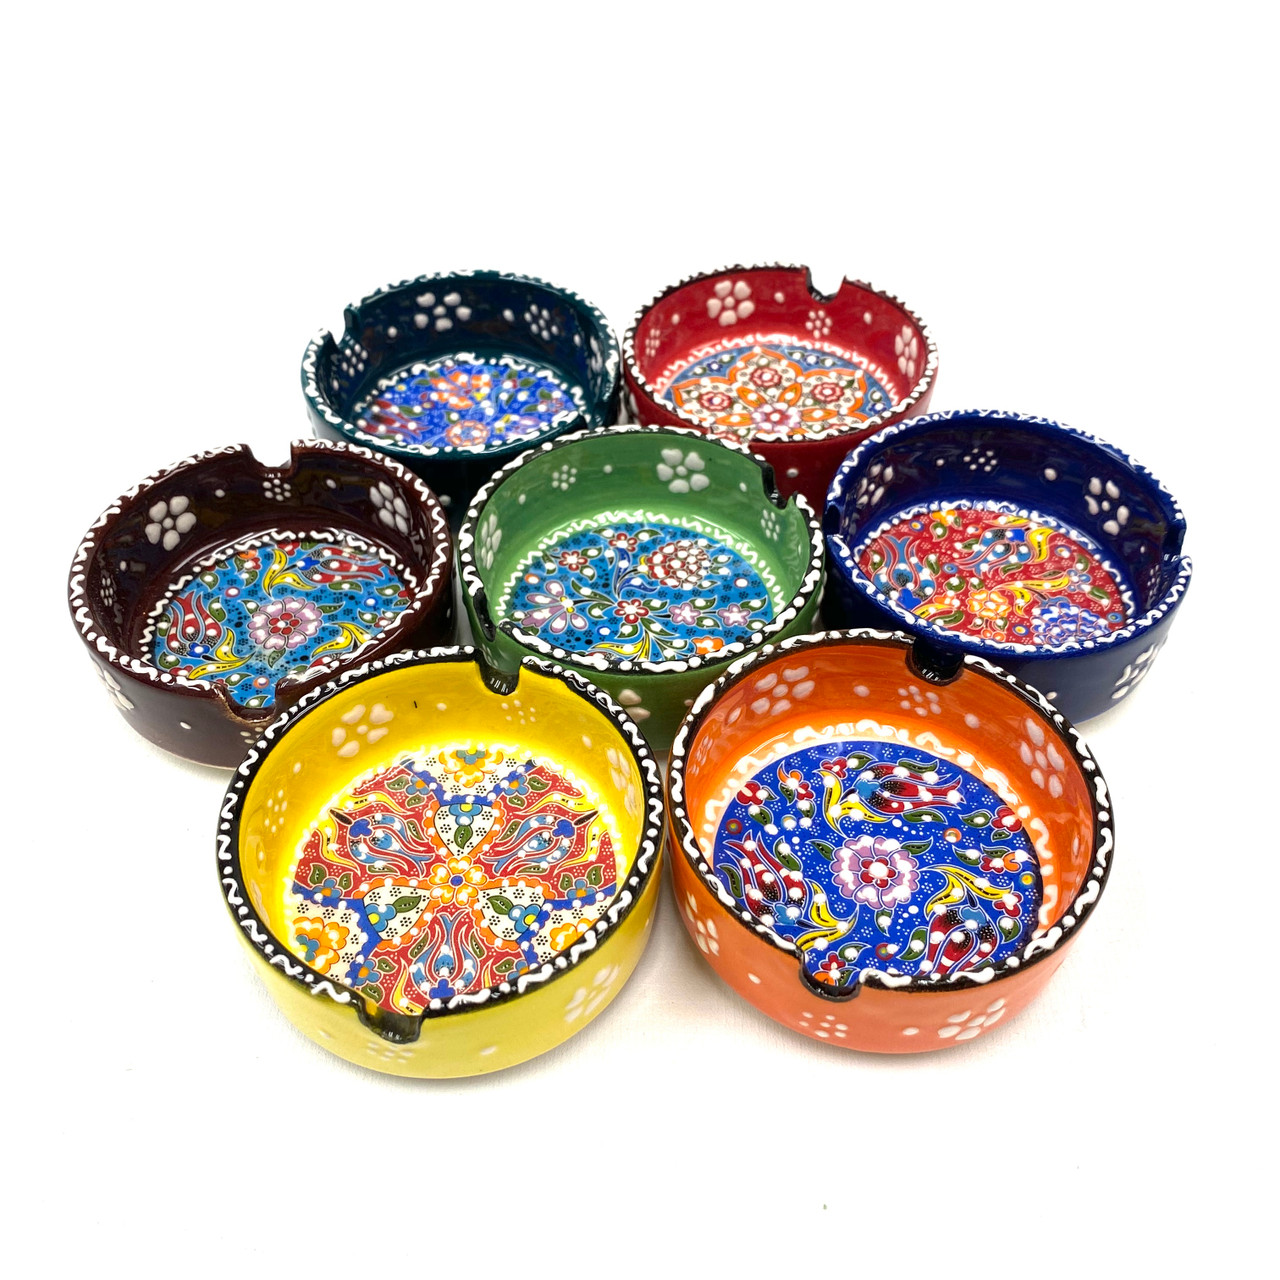 https://cdn11.bigcommerce.com/s-1x66nel38s/images/stencil/1280x1280/products/4209/23614/gf-nimt-ash300-hand-painted-turkish-ceramic-ashtray-assorted-colors-1-count-3__48647.1646684480.jpg?c=1